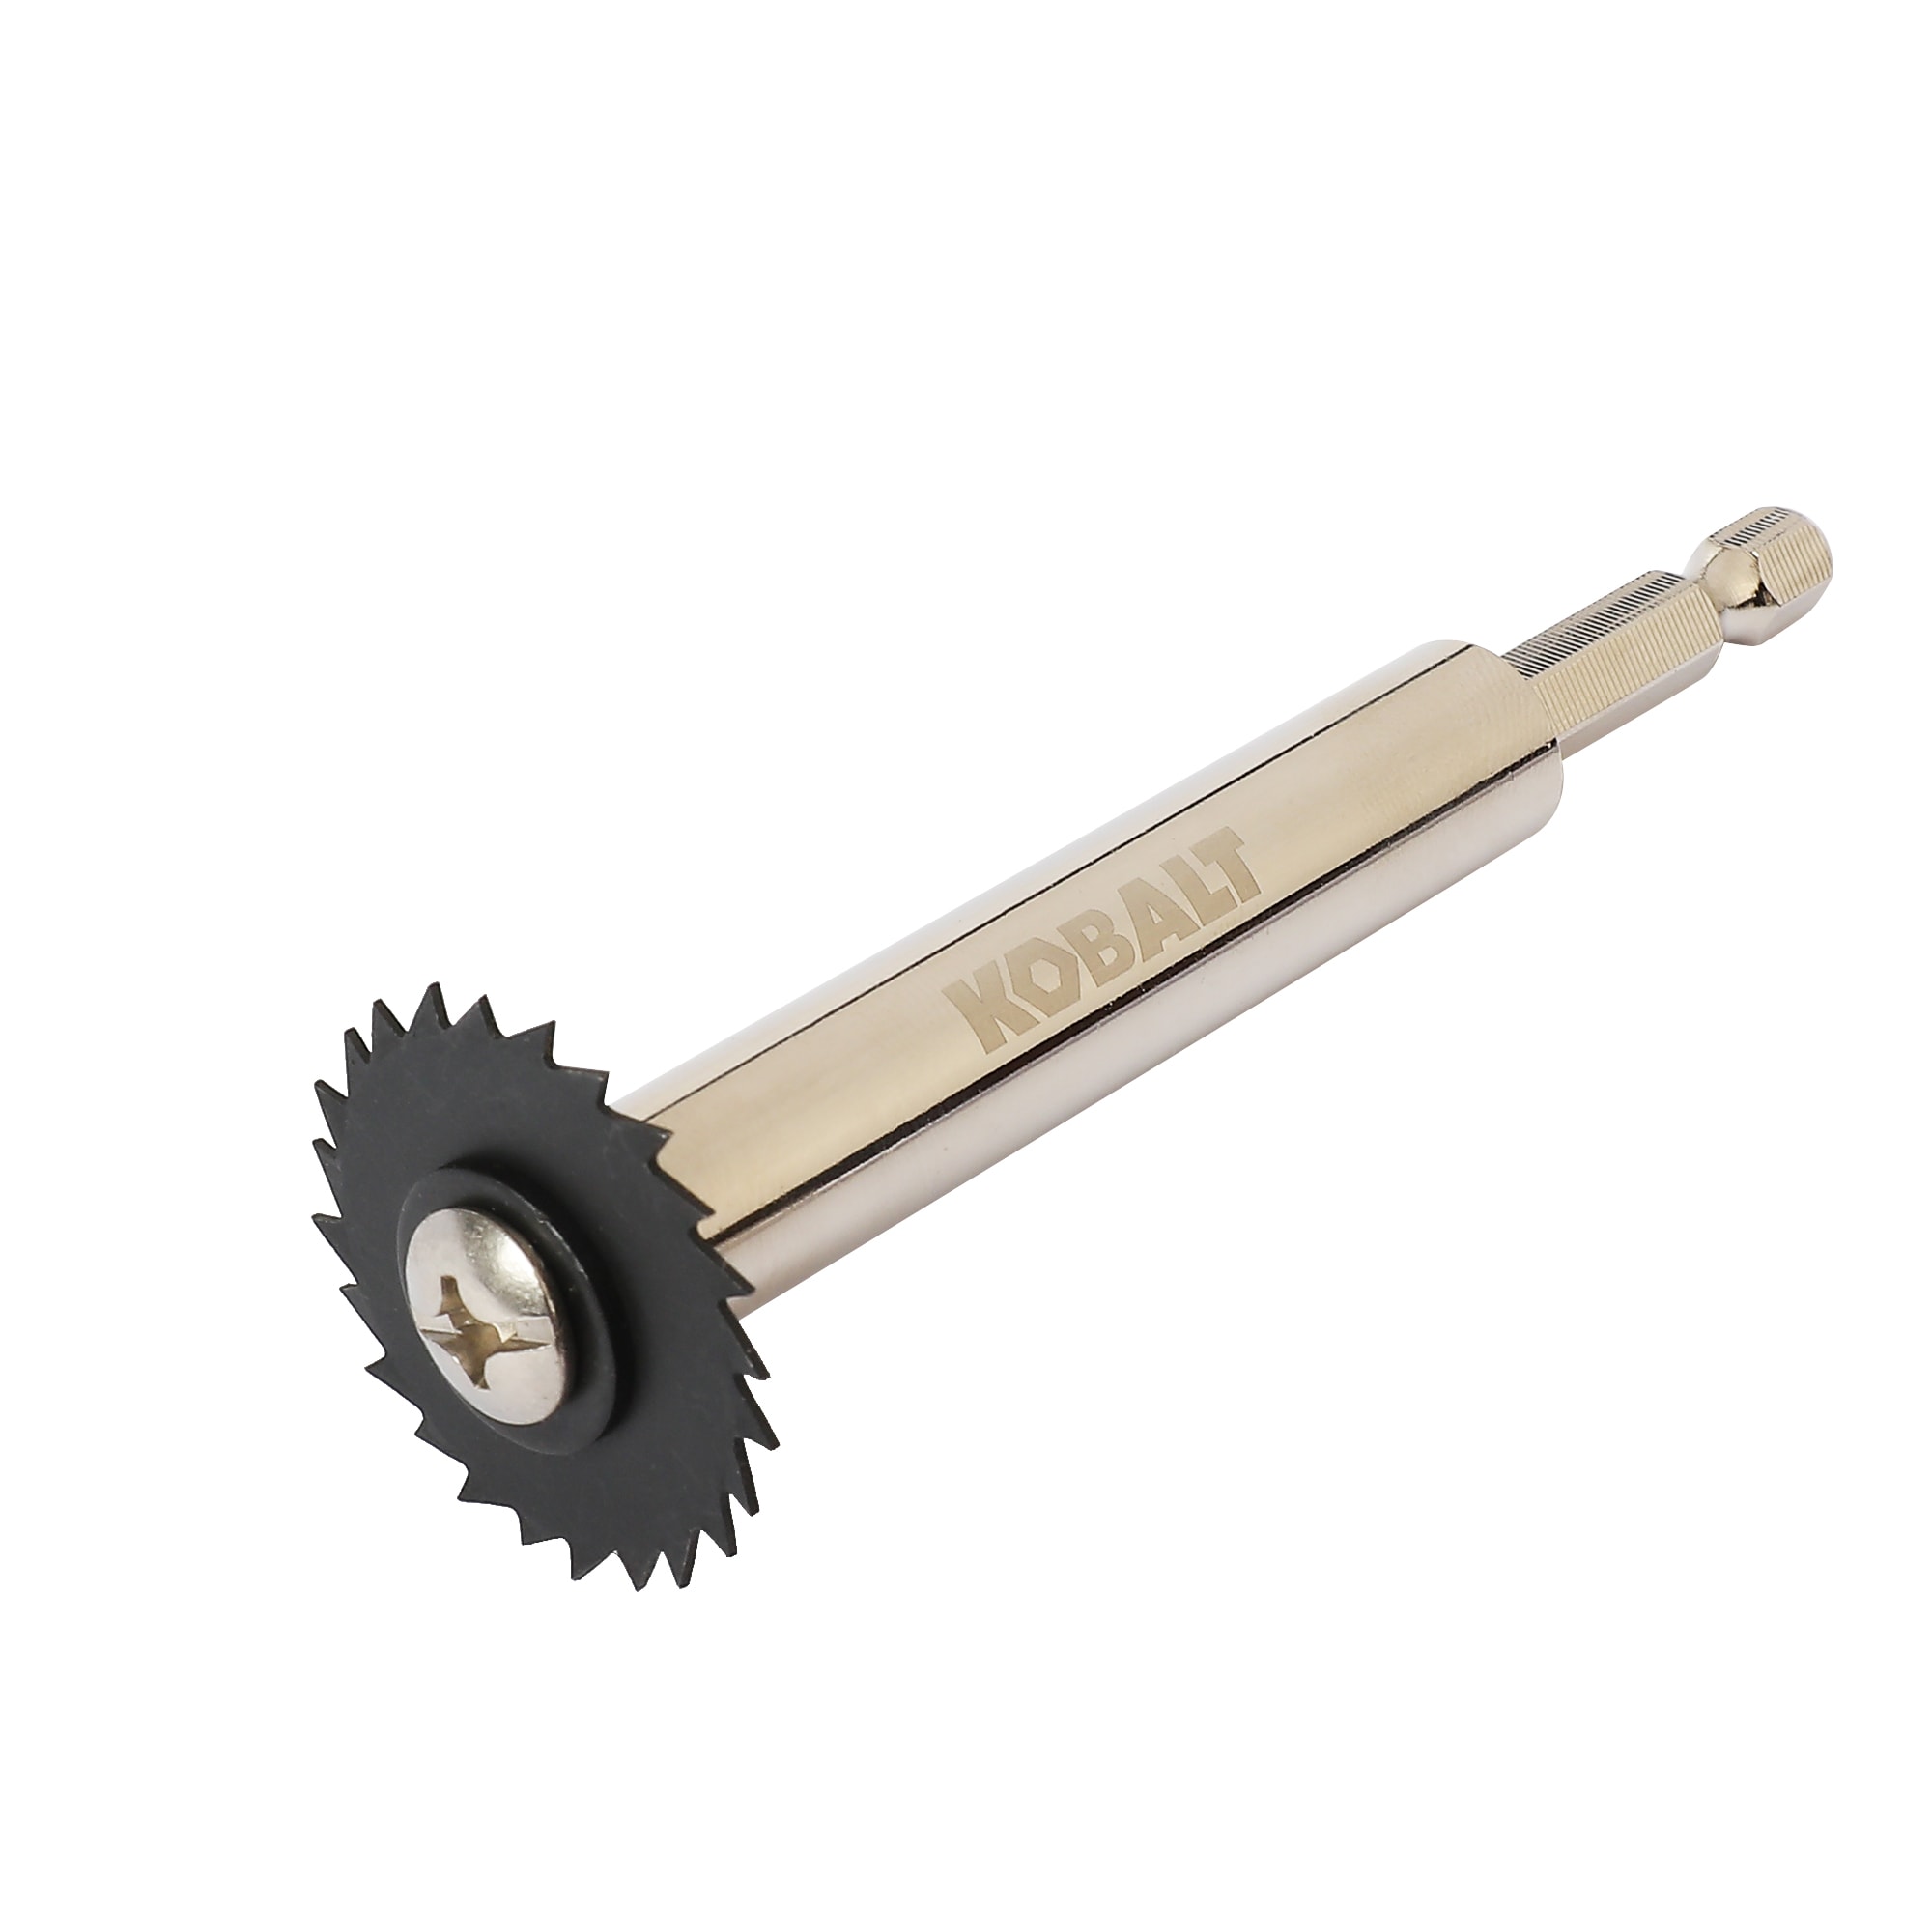 4-inch-x-1/4-inch-Brass-Crimped-Coarse-Wire-Wheel-Recyclable-Stay Sharp